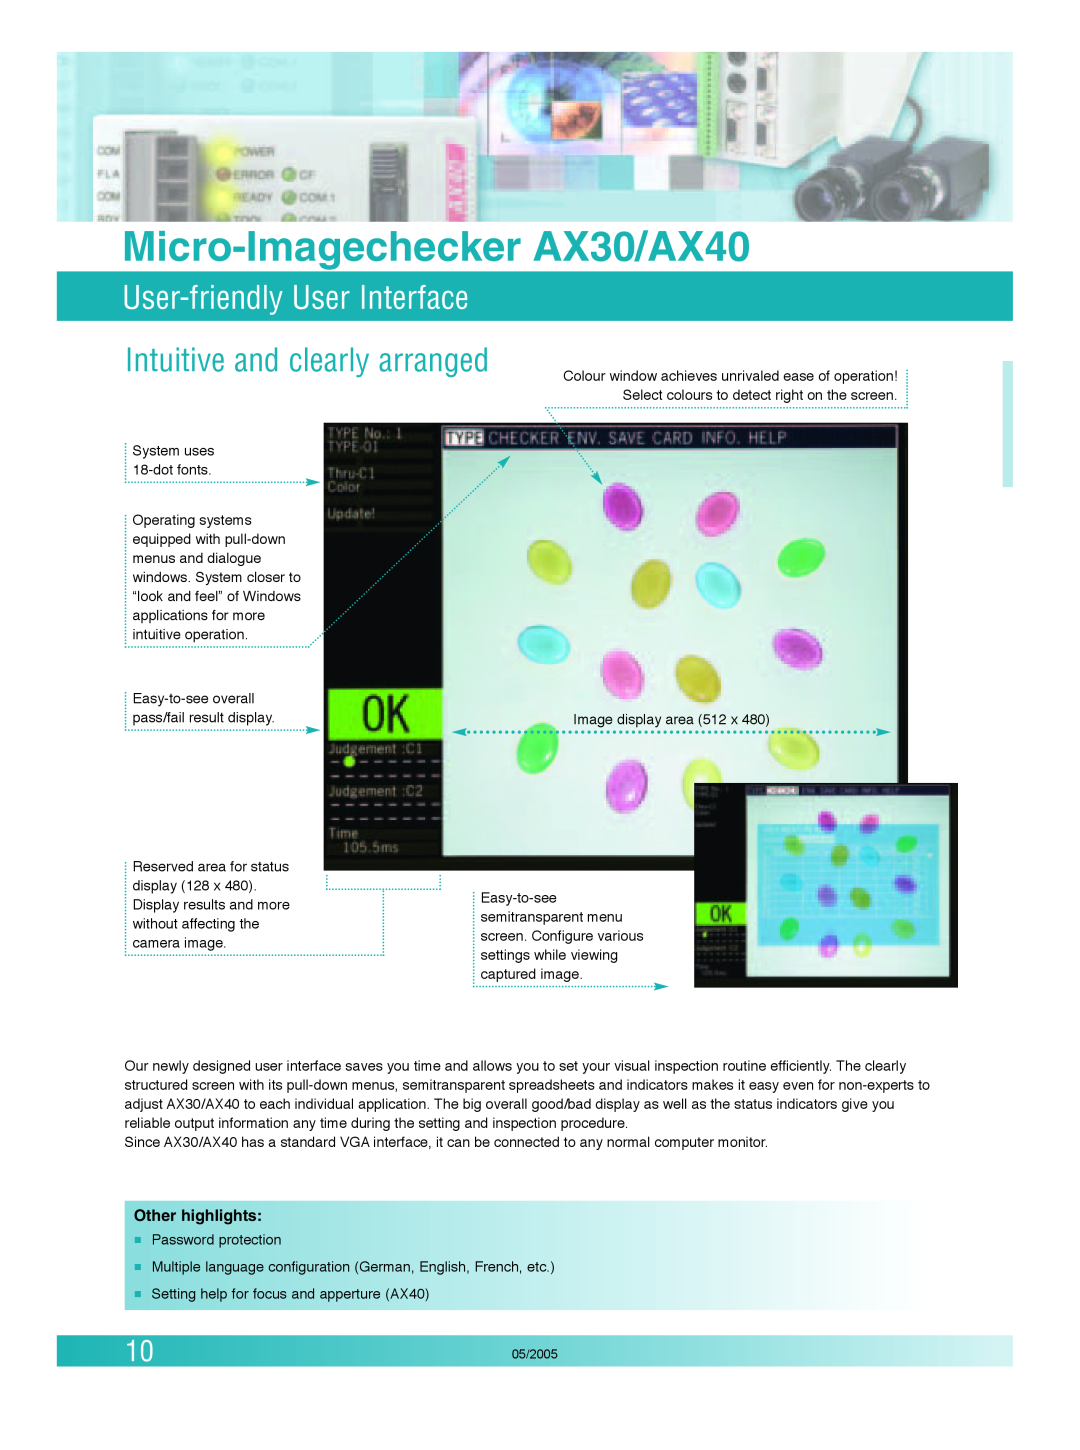 Panasonic User-friendly User Interface, Intuitive and clearly arranged, Micro-Imagechecker AX30/AX40, Other highlights 